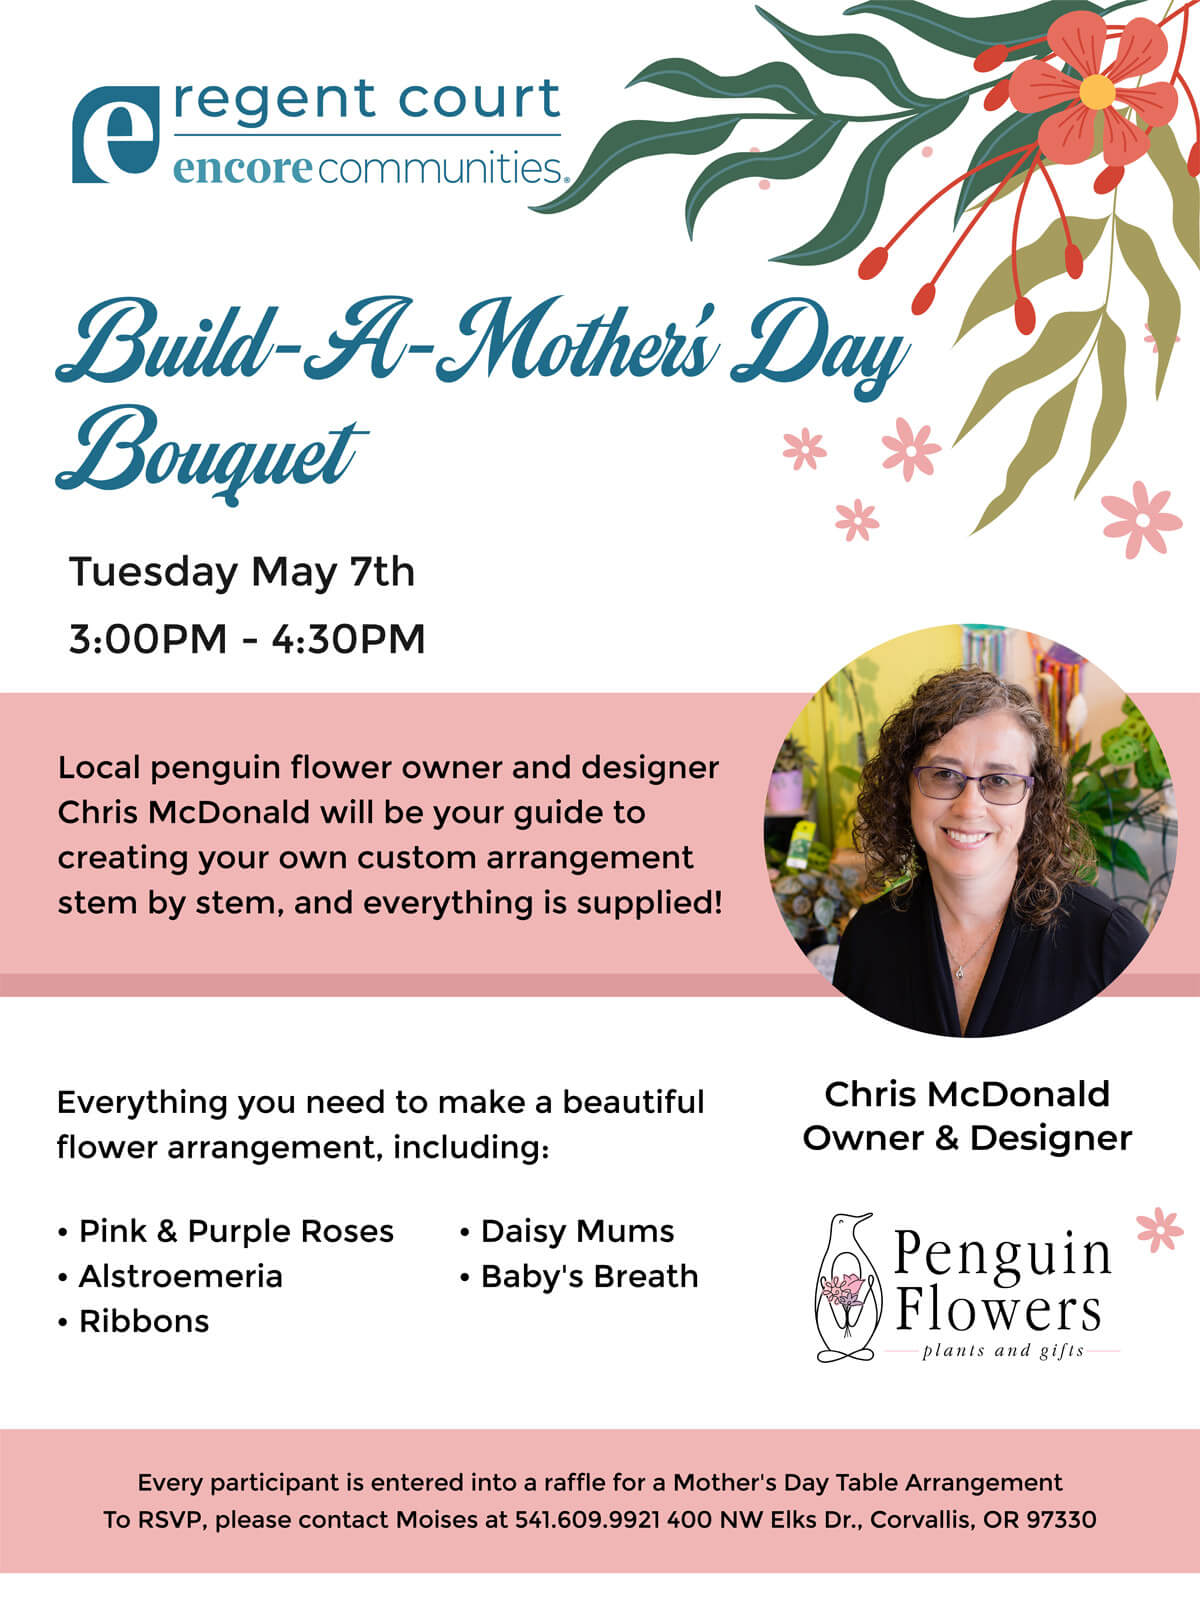 Build-A-Mother's Day Bouquet